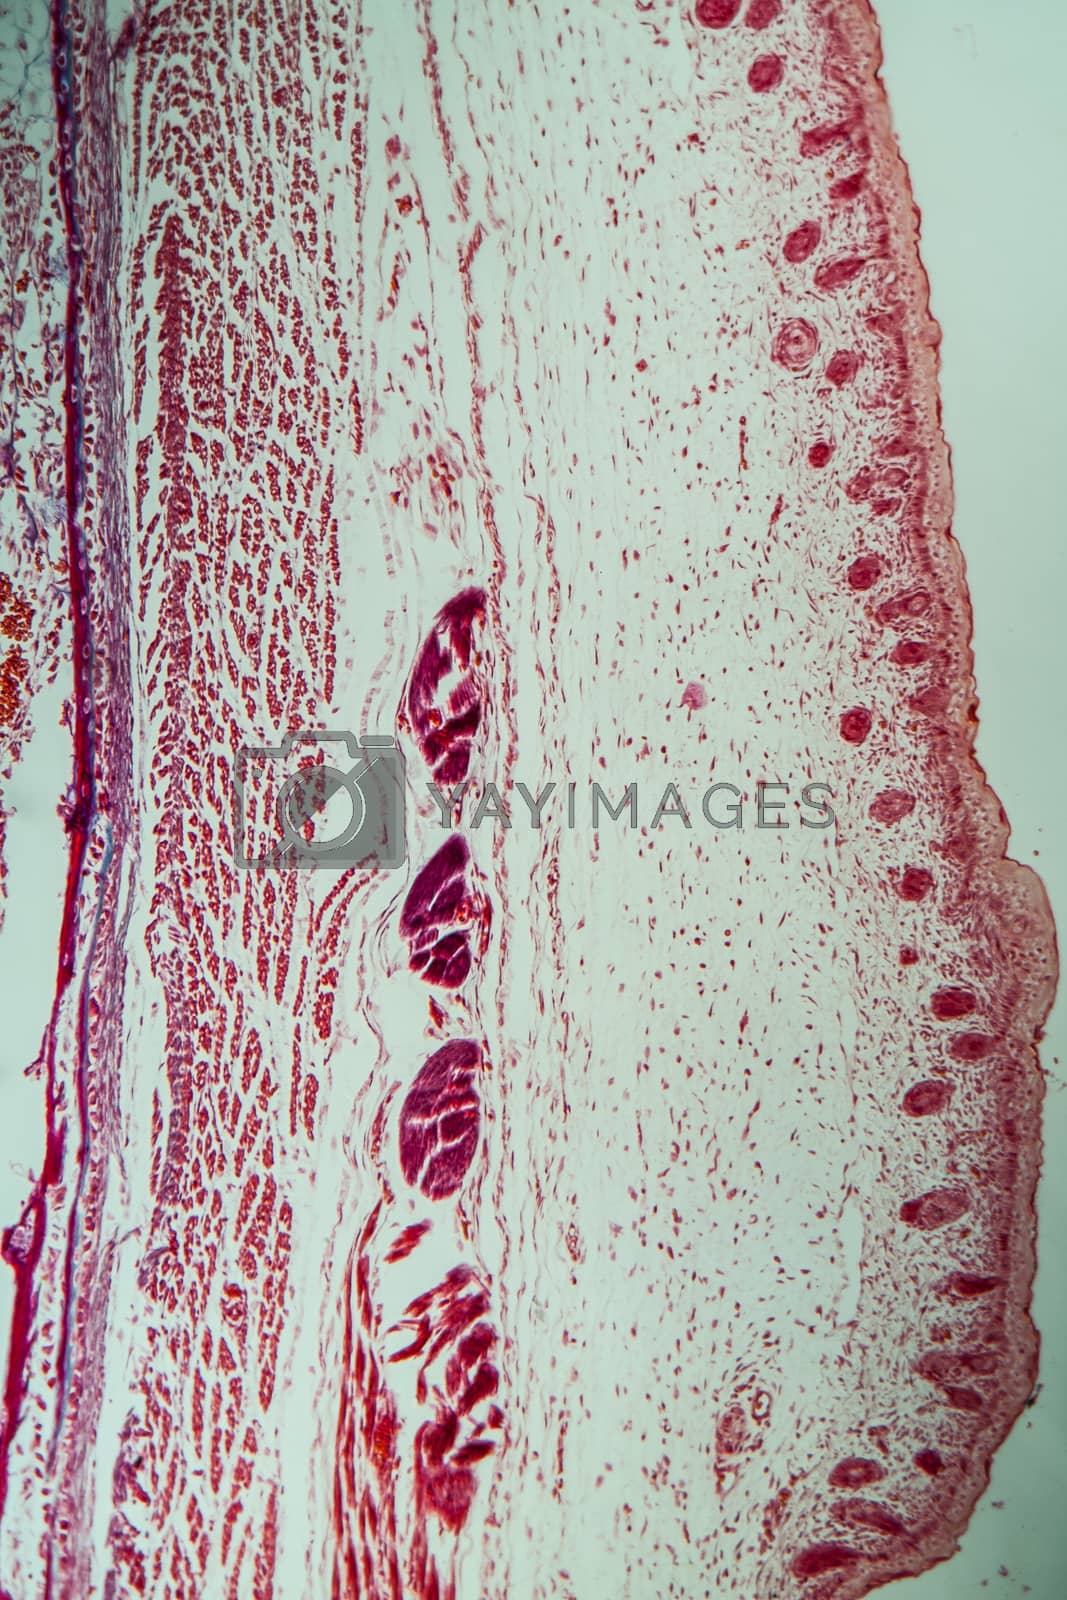 Royalty free image of Embryonic cartilage under the microscope 200x by Dr-Lange